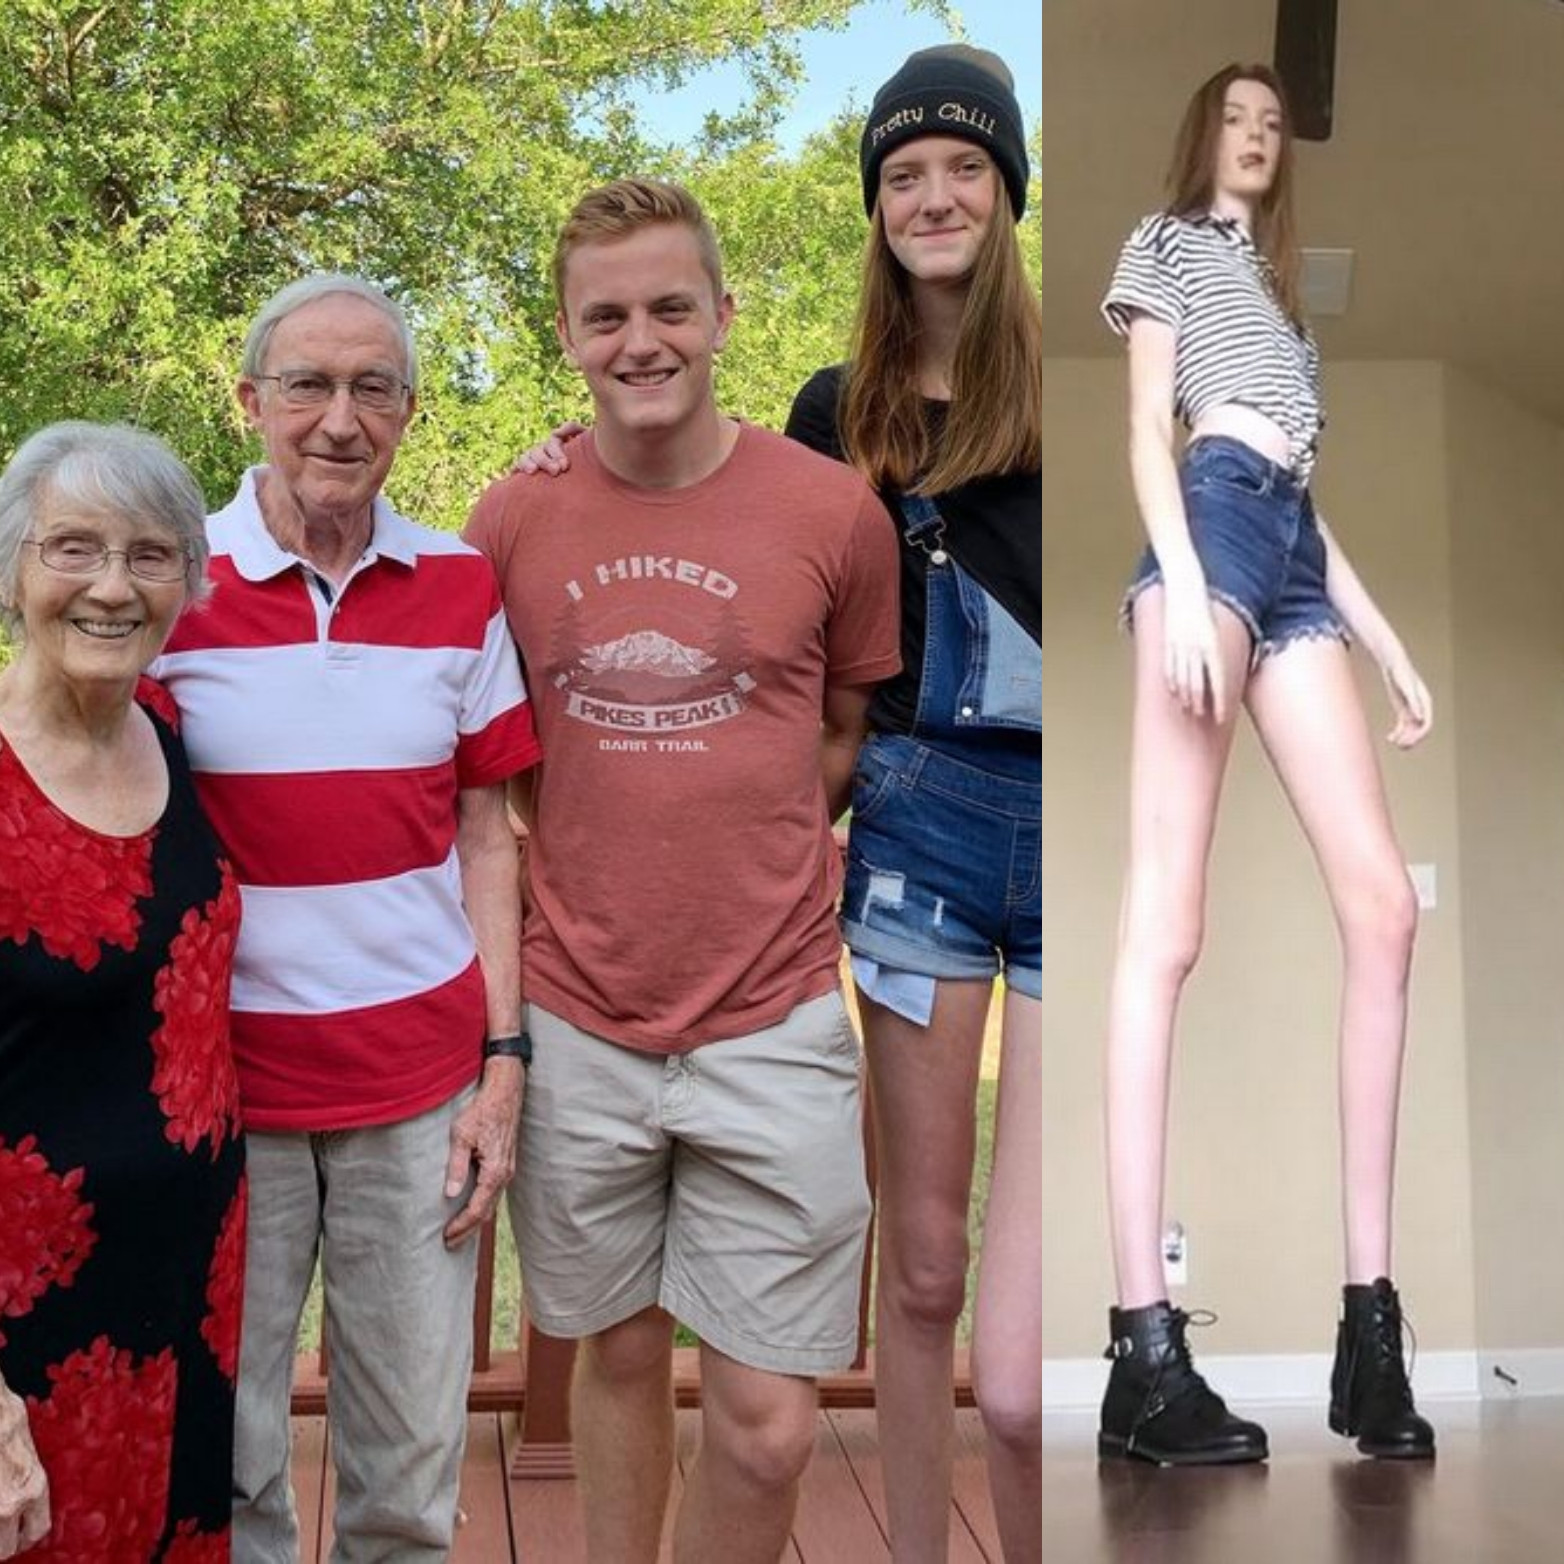 Teen becomes Guinness World Record holder for having both the longest female and teenage legs on the planet. 60